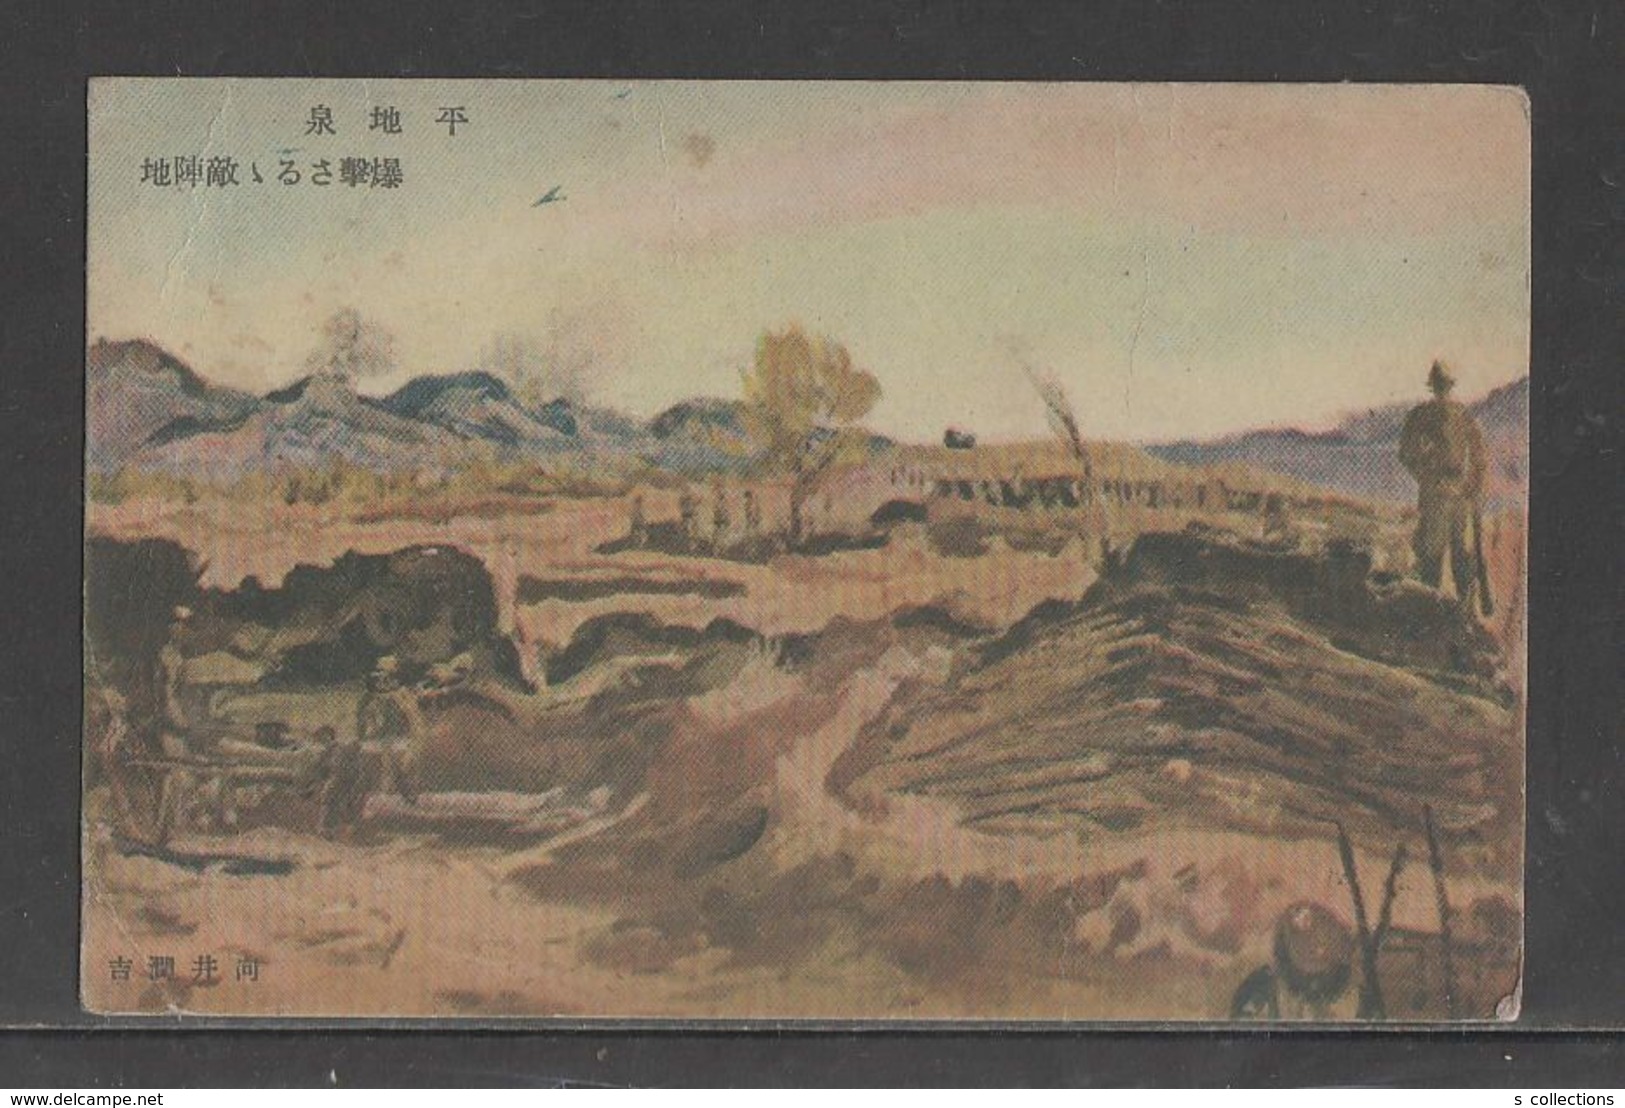 JAPAN WWII Military Pingdiquan Picture Postcard NORTH CHINA CHINE WW2 MANCHURIA CHINE MANDCHOUKOUO JAPON GIAPPONE - 1941-45 Cina Del Nord